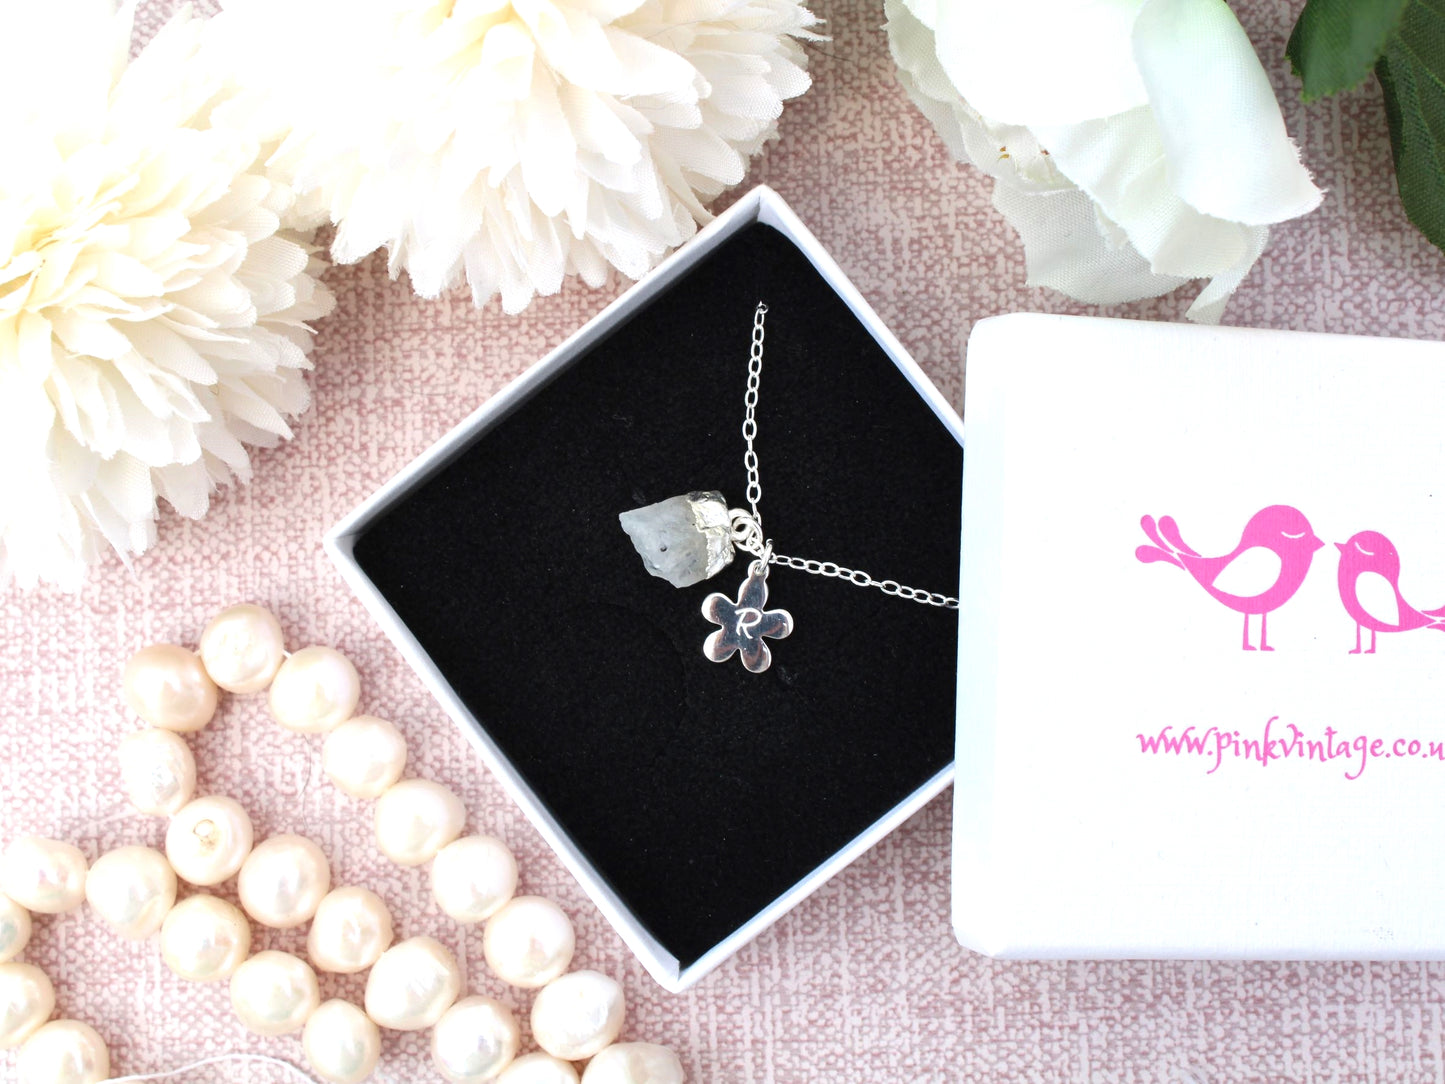 Personalised moonstone necklace in sterling silver.